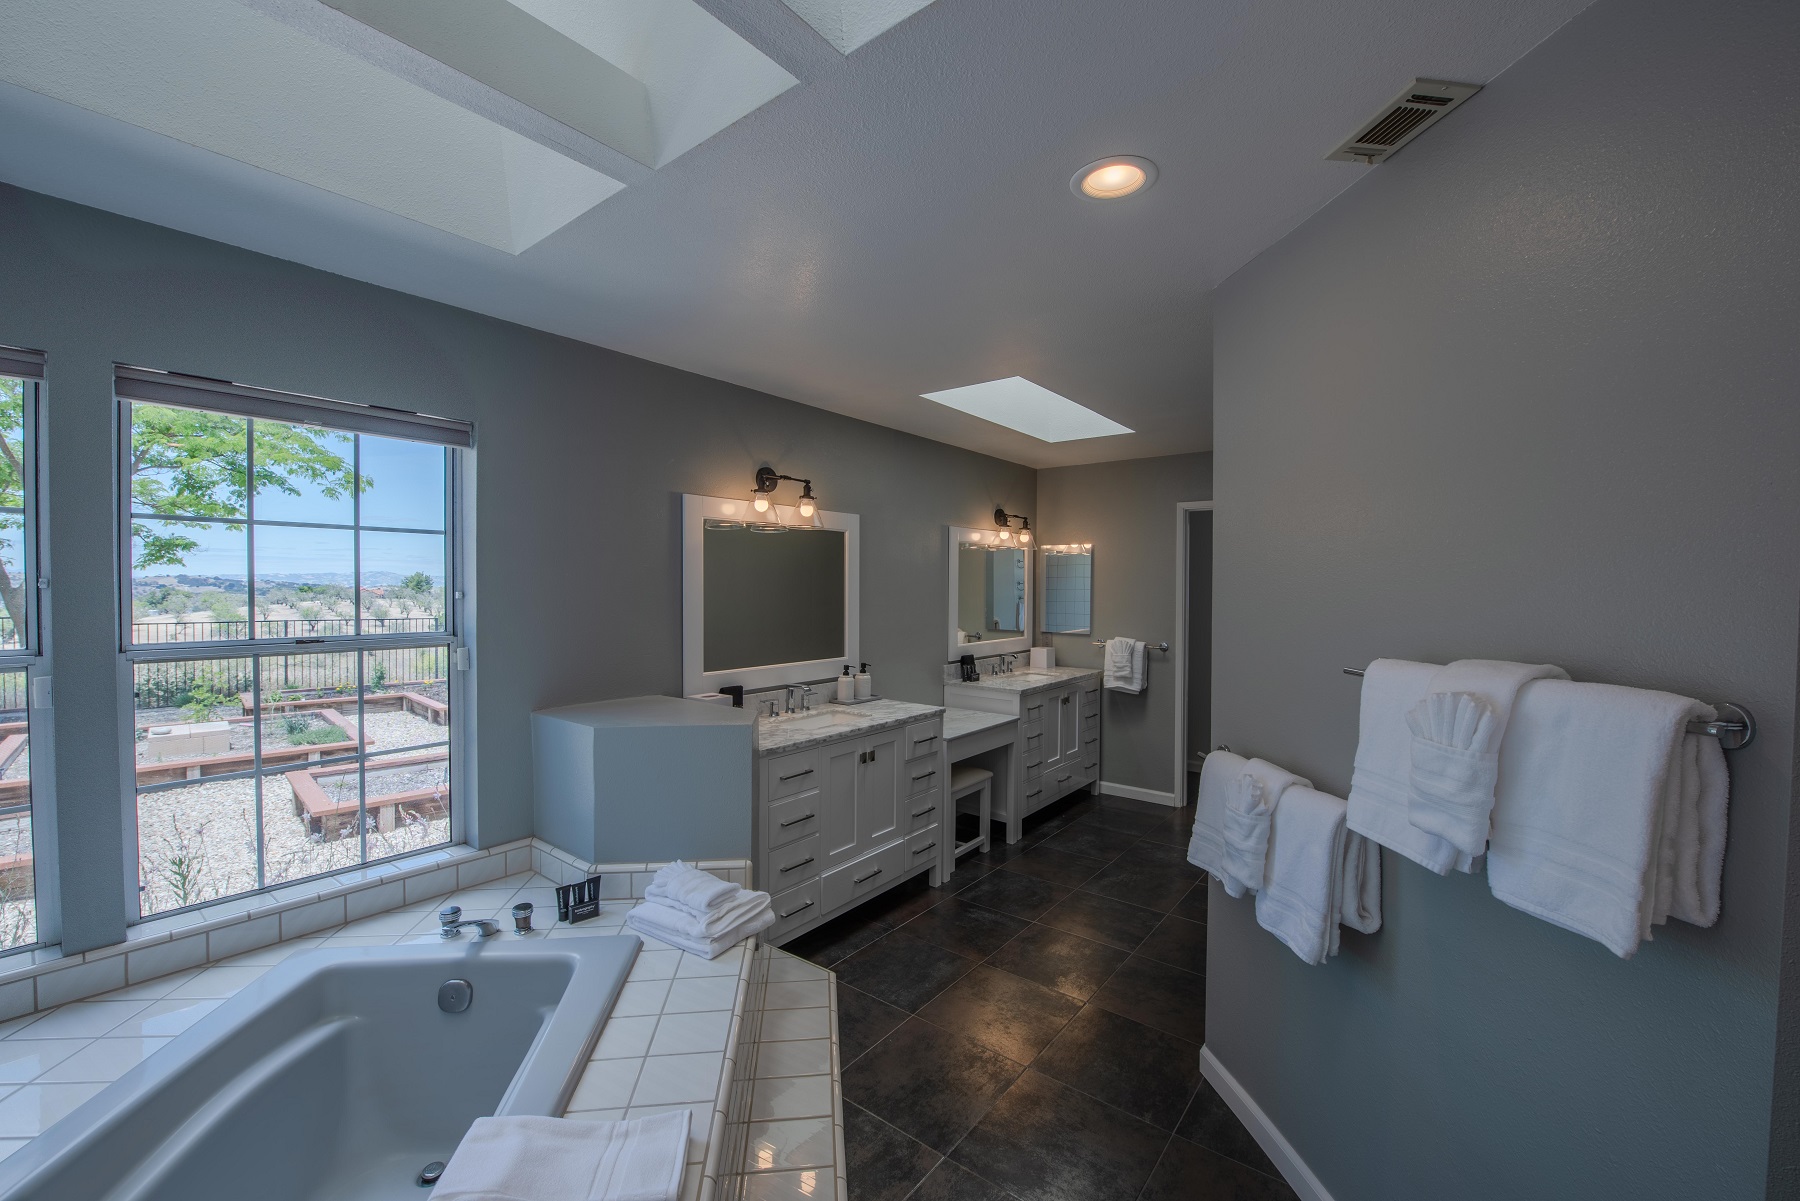 Master bath with large Jacuzzi tub. Soak while you watch a beautiful sunset Tub overlooking the herb garden. Two vanities, water closet and large walk-in shower complete the master en suite.